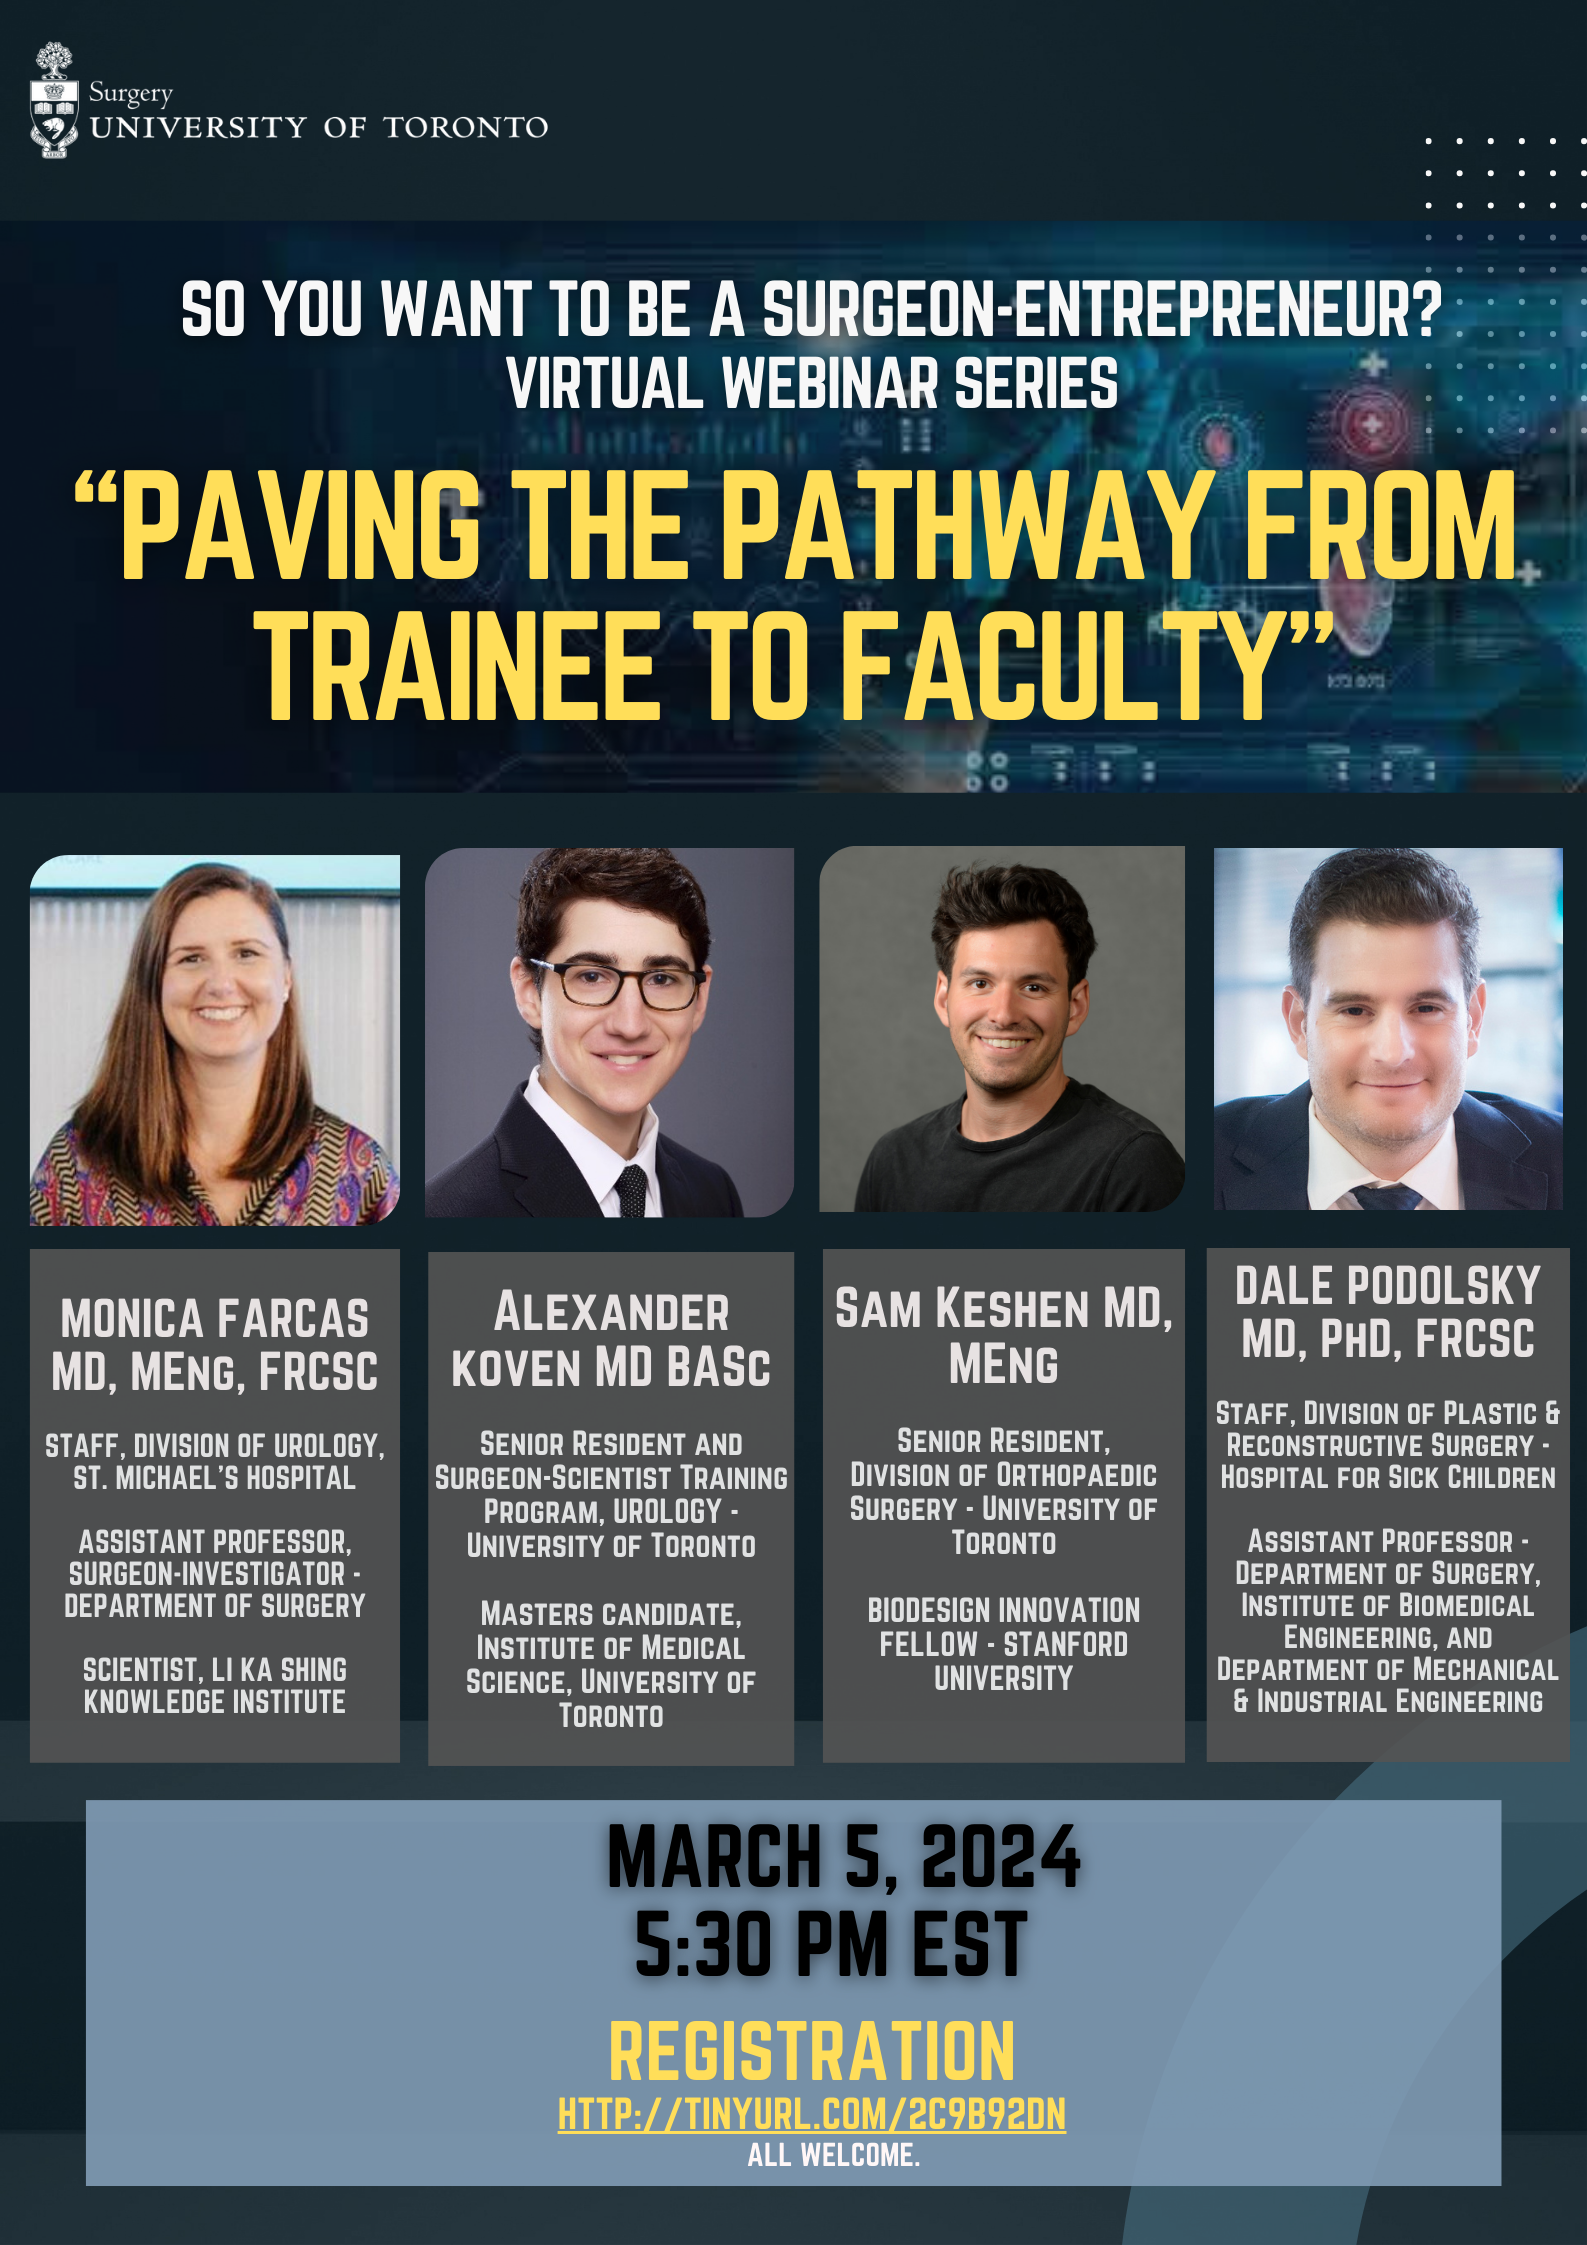 Paving the pathway from trainee to faculty